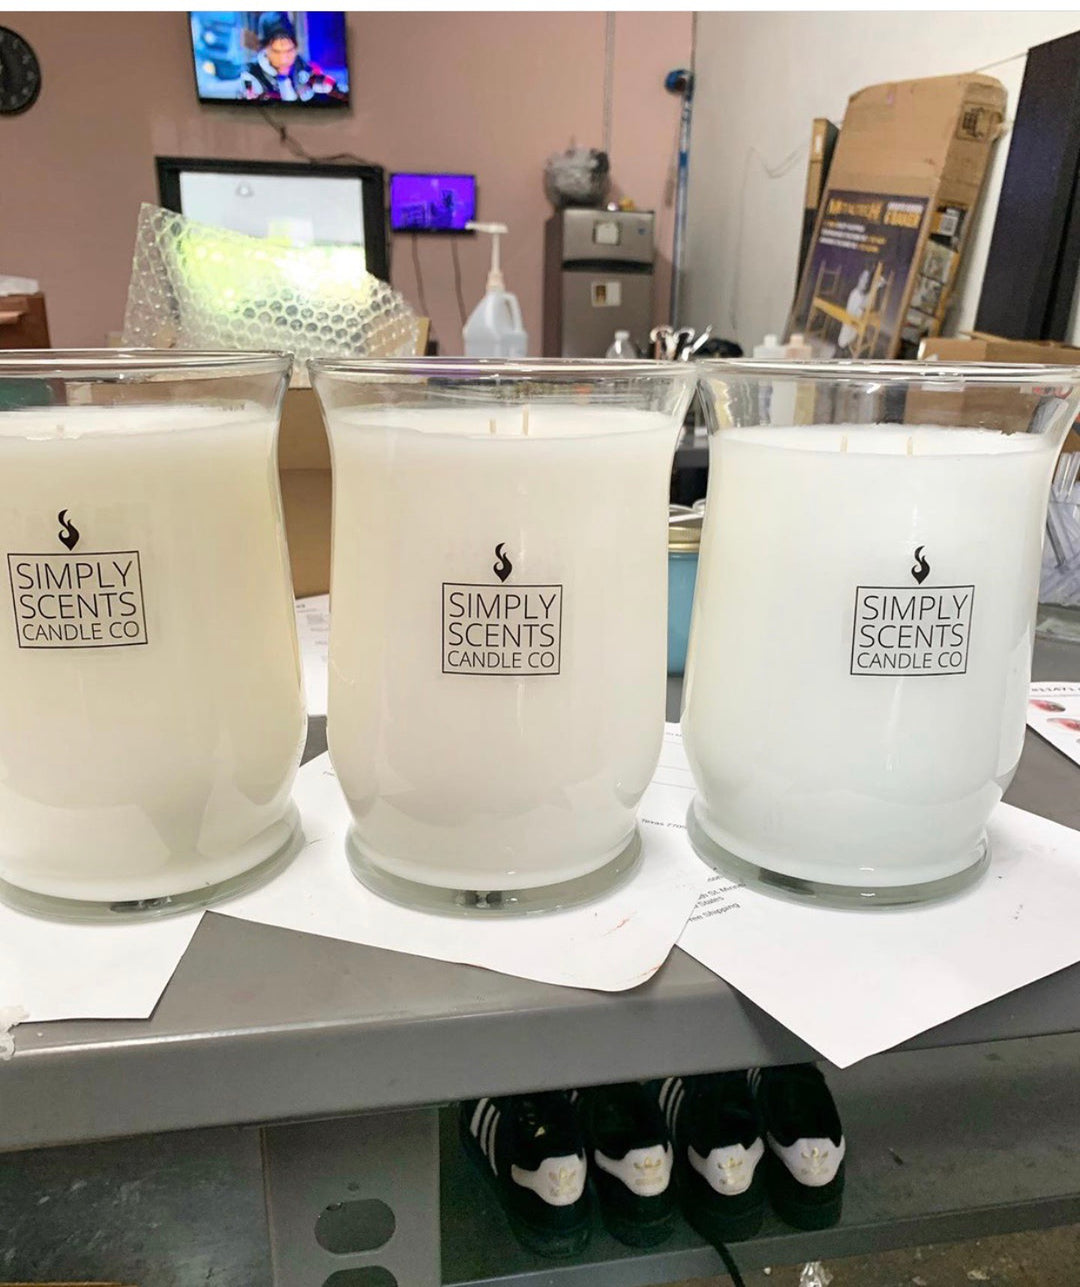 The All-White 72 oz. Signature Candle